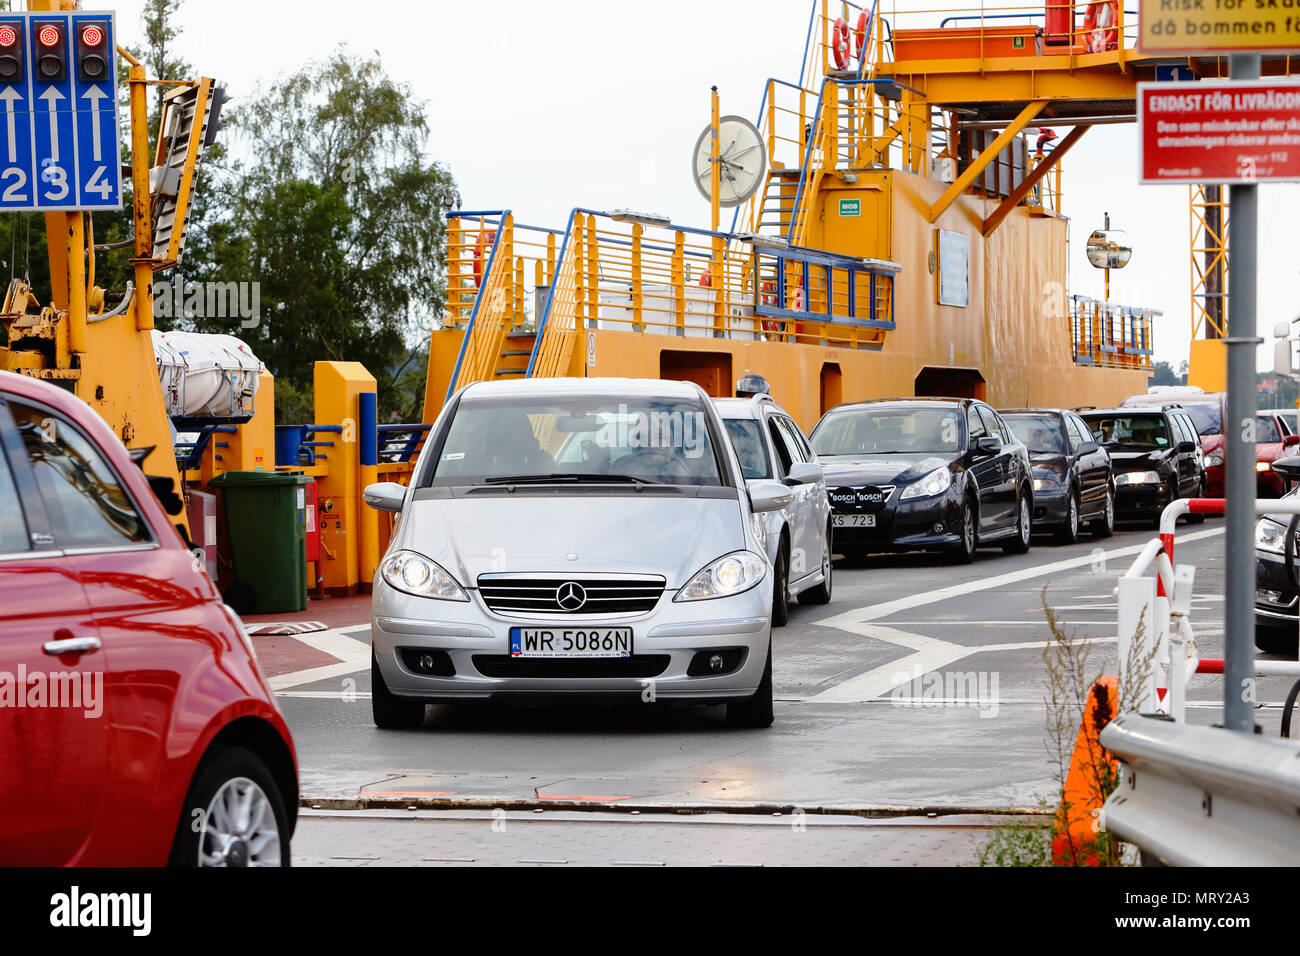 Slagsta, Sweden - August 13, 2014: Yellow road ferry with cars operated by the Swedish Transport Administration (Trafikverket) at the Slagsta berth wi Stock Photo